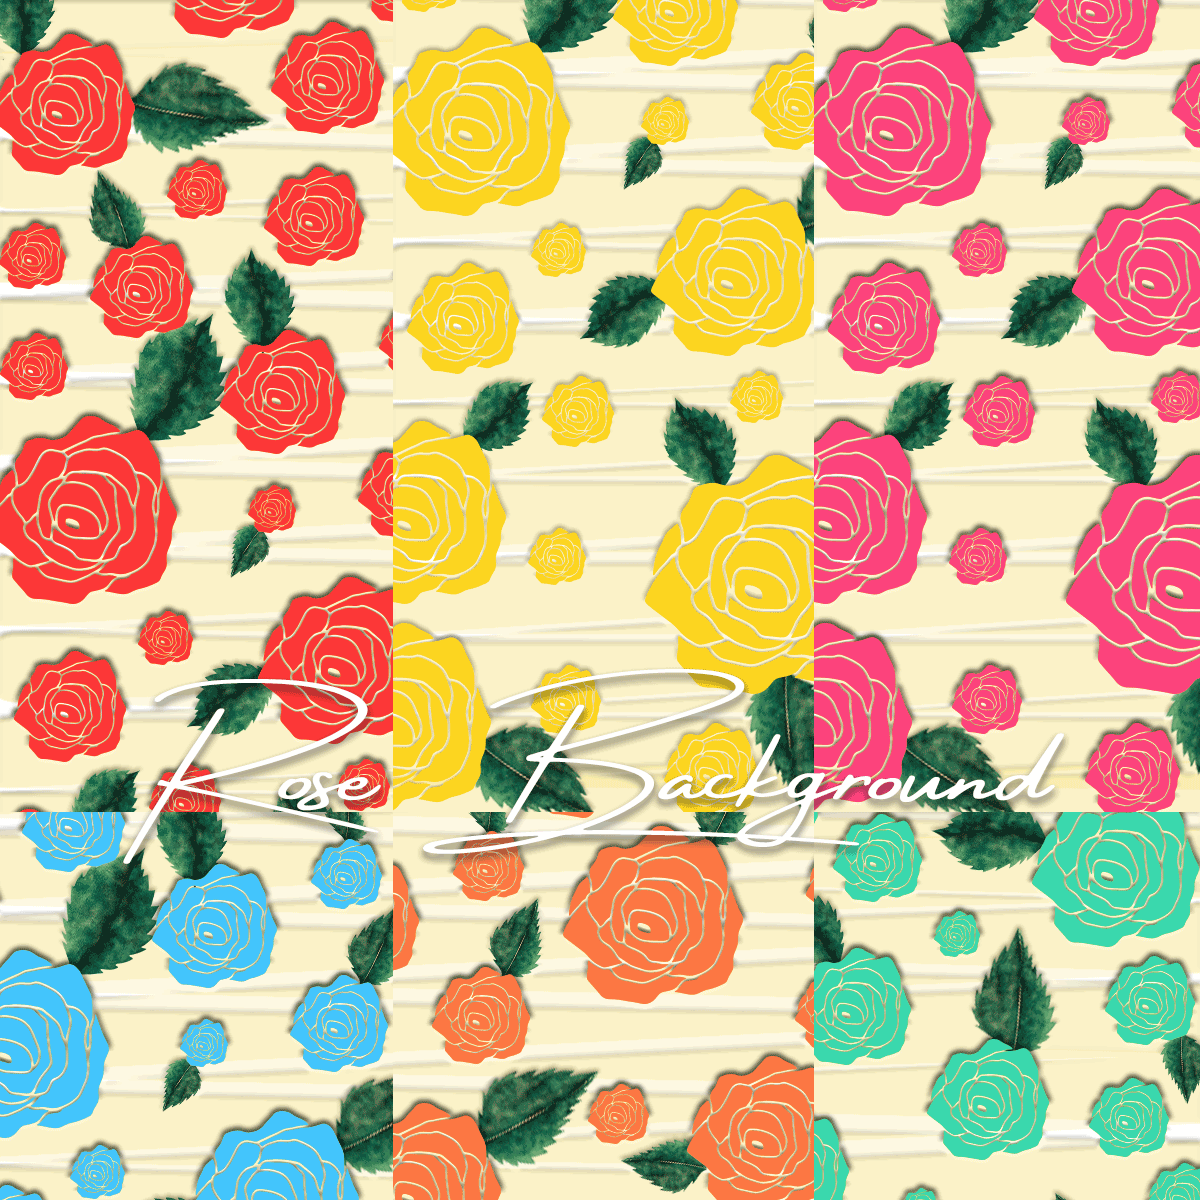 Rose-Background-Designs preview image.